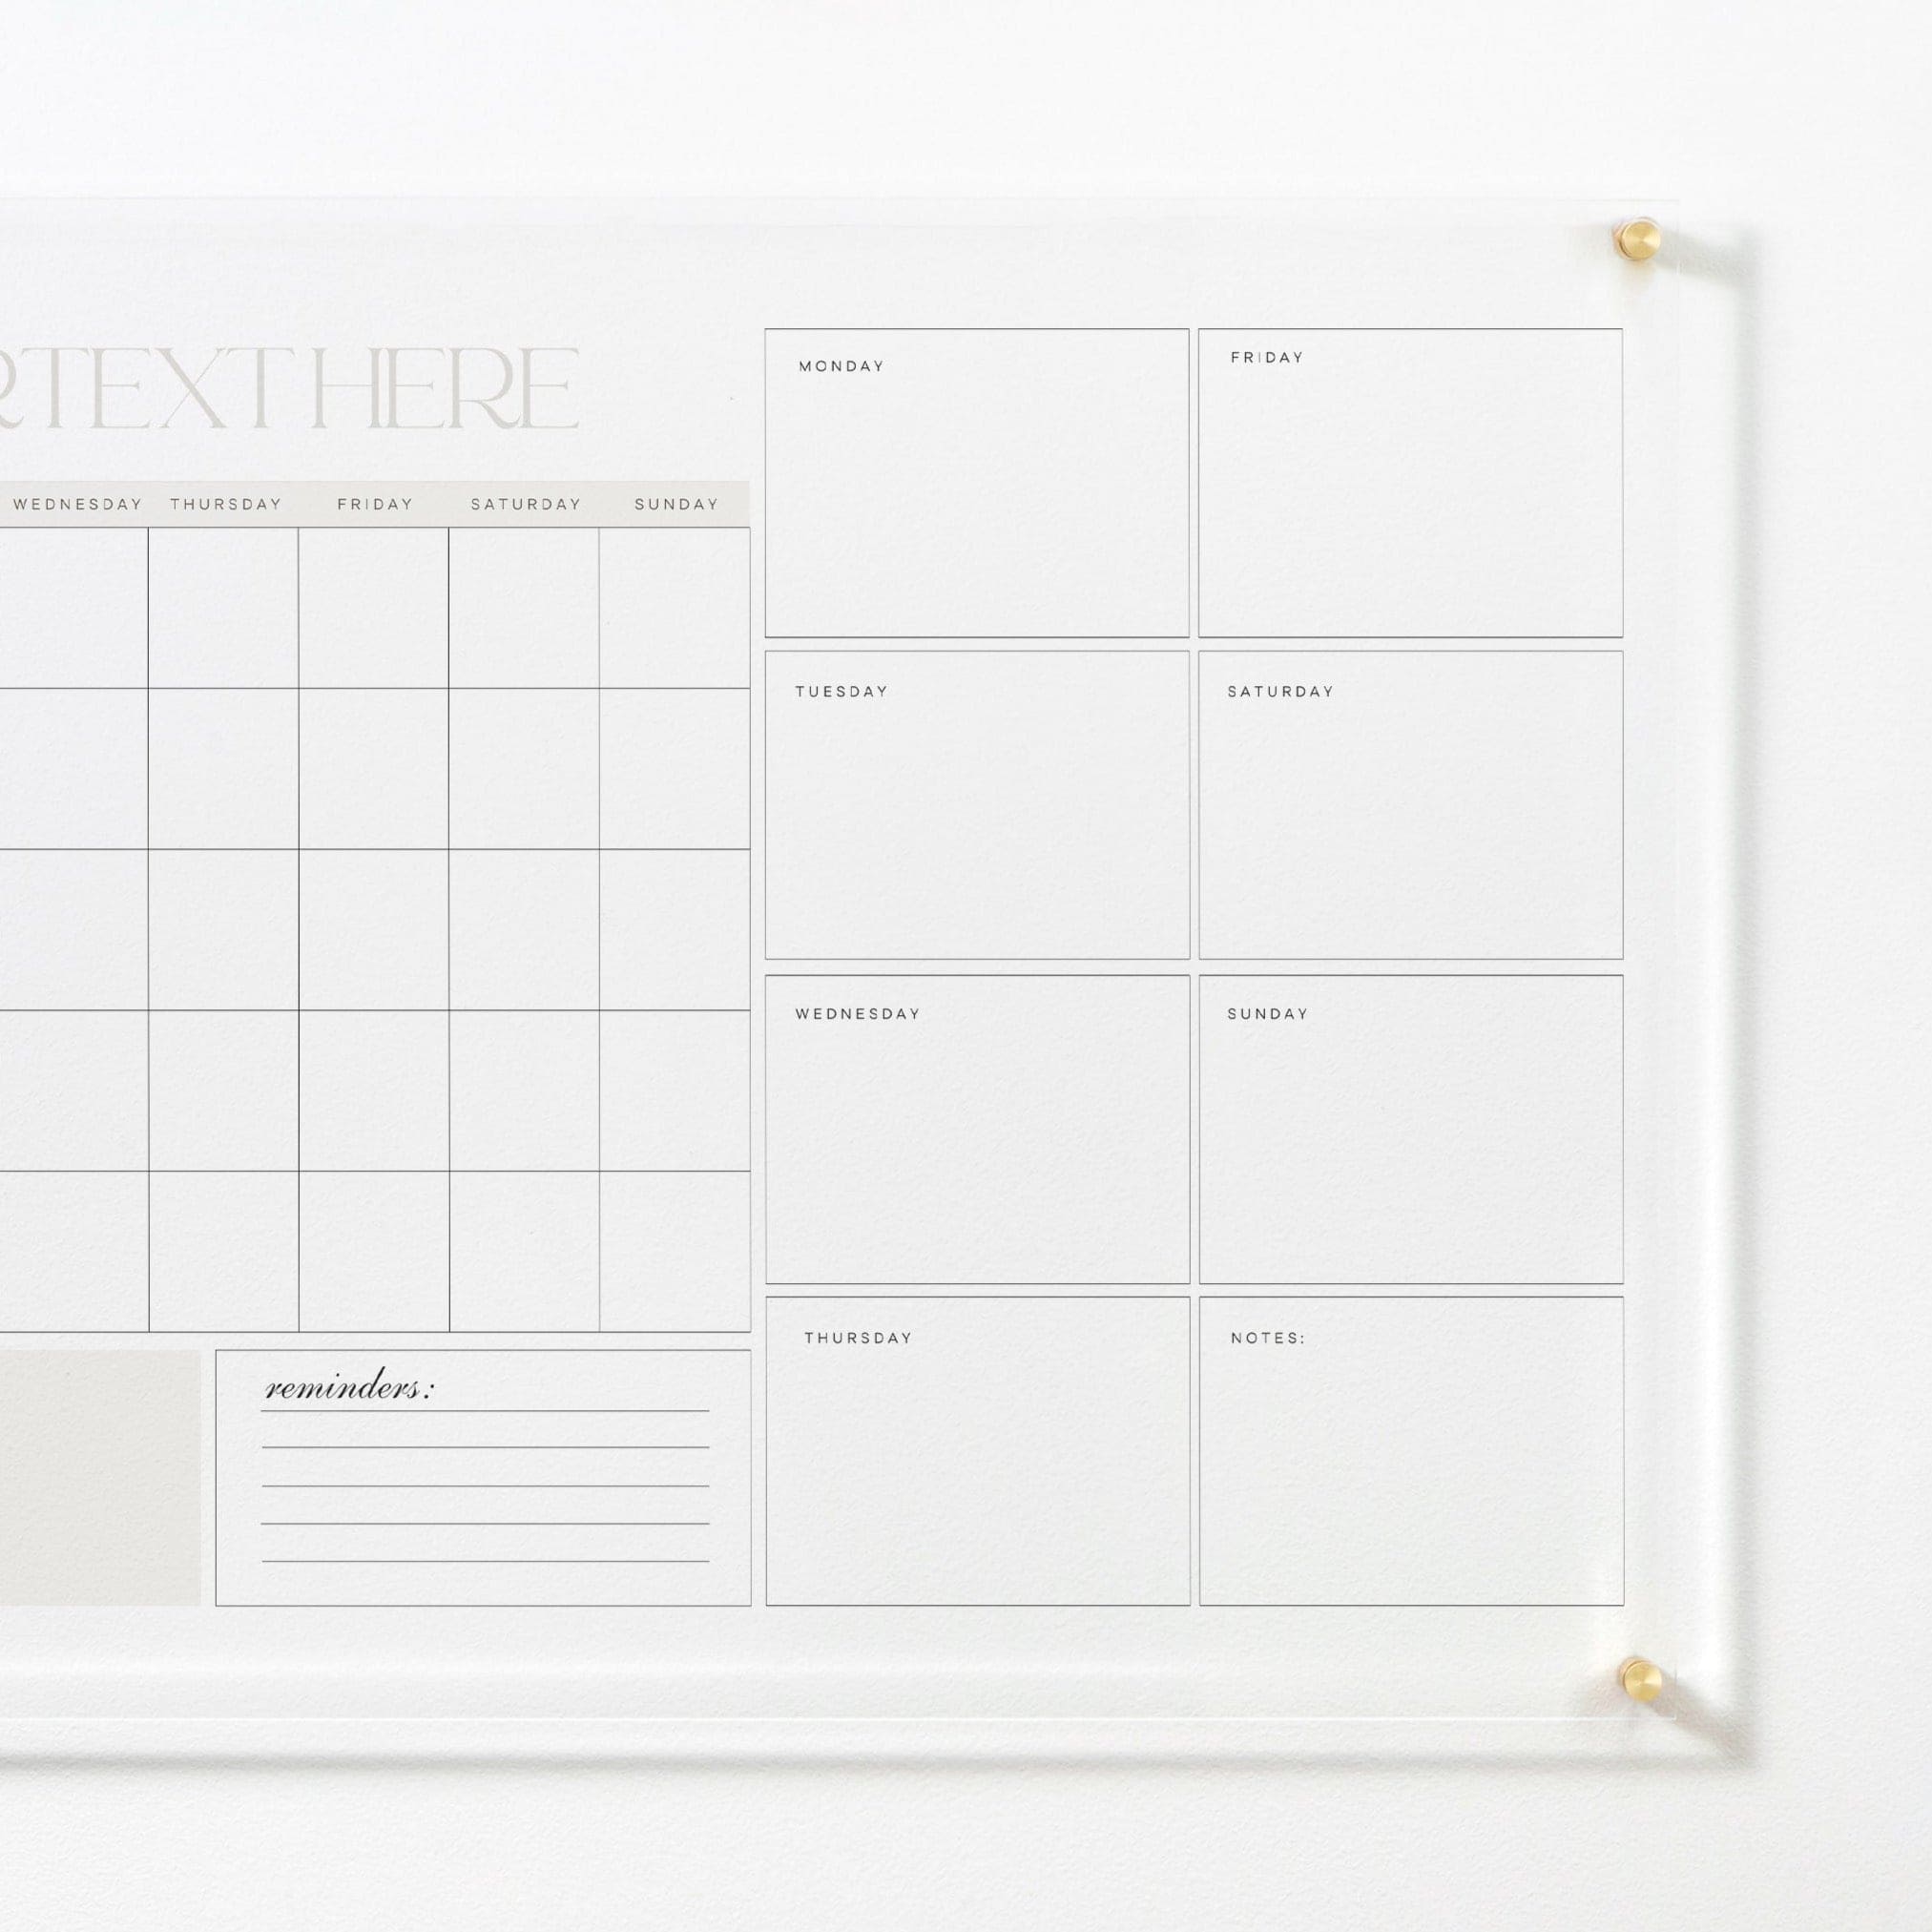 Dry erase calendar with a grid layout for days of the week and an additional notes section, featuring a sleek and minimalistic design.